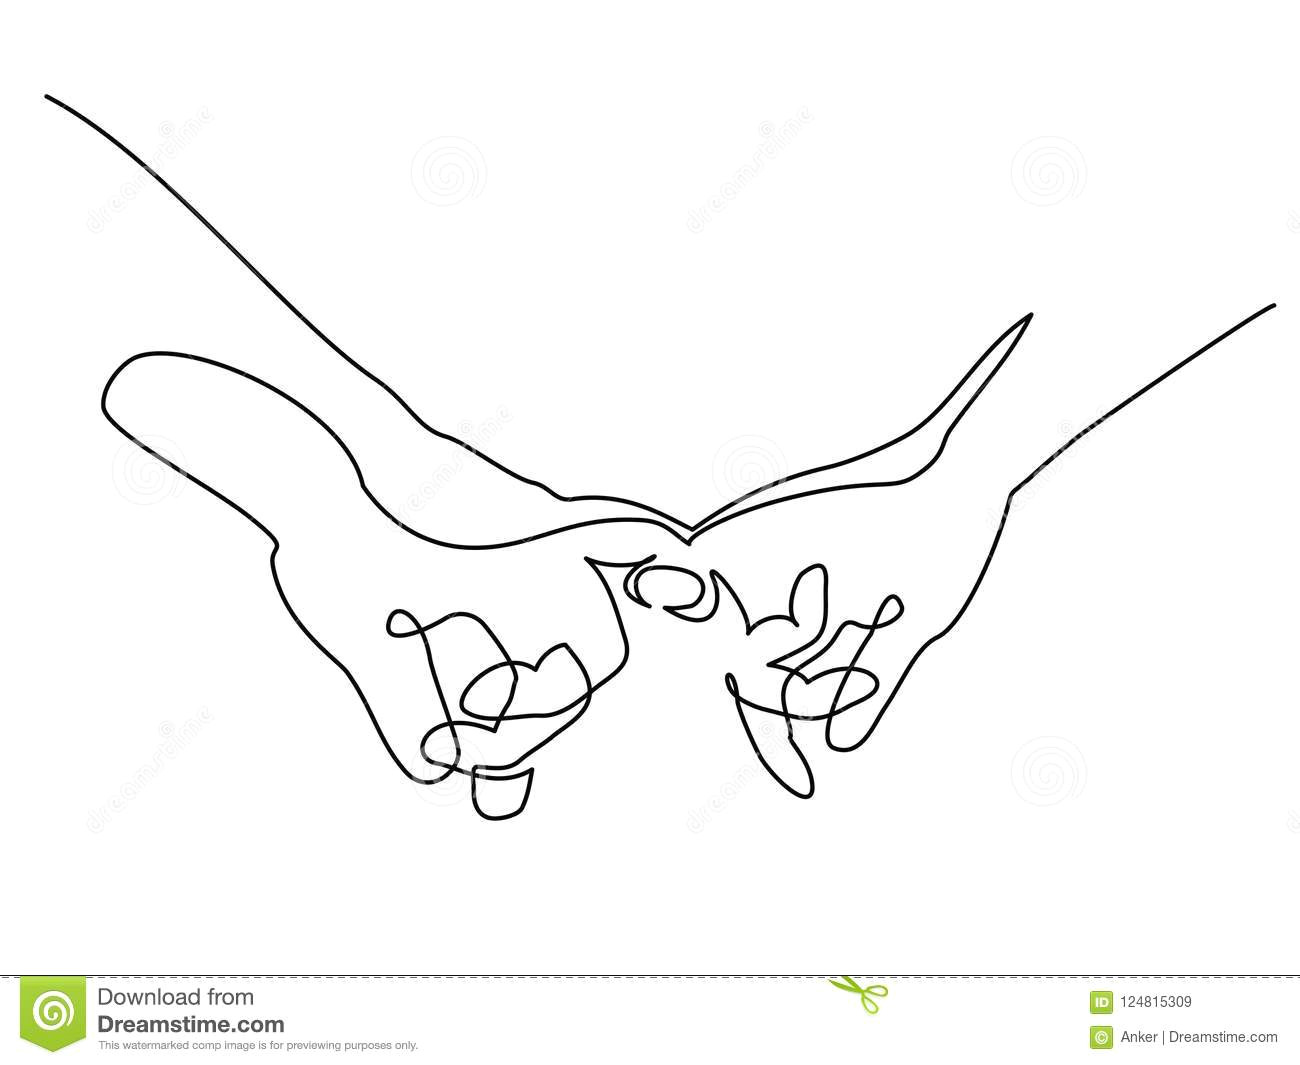 Drawing Of Two Hands Shaking Hands Woman and Man Holding together with Fingers Stock Vector